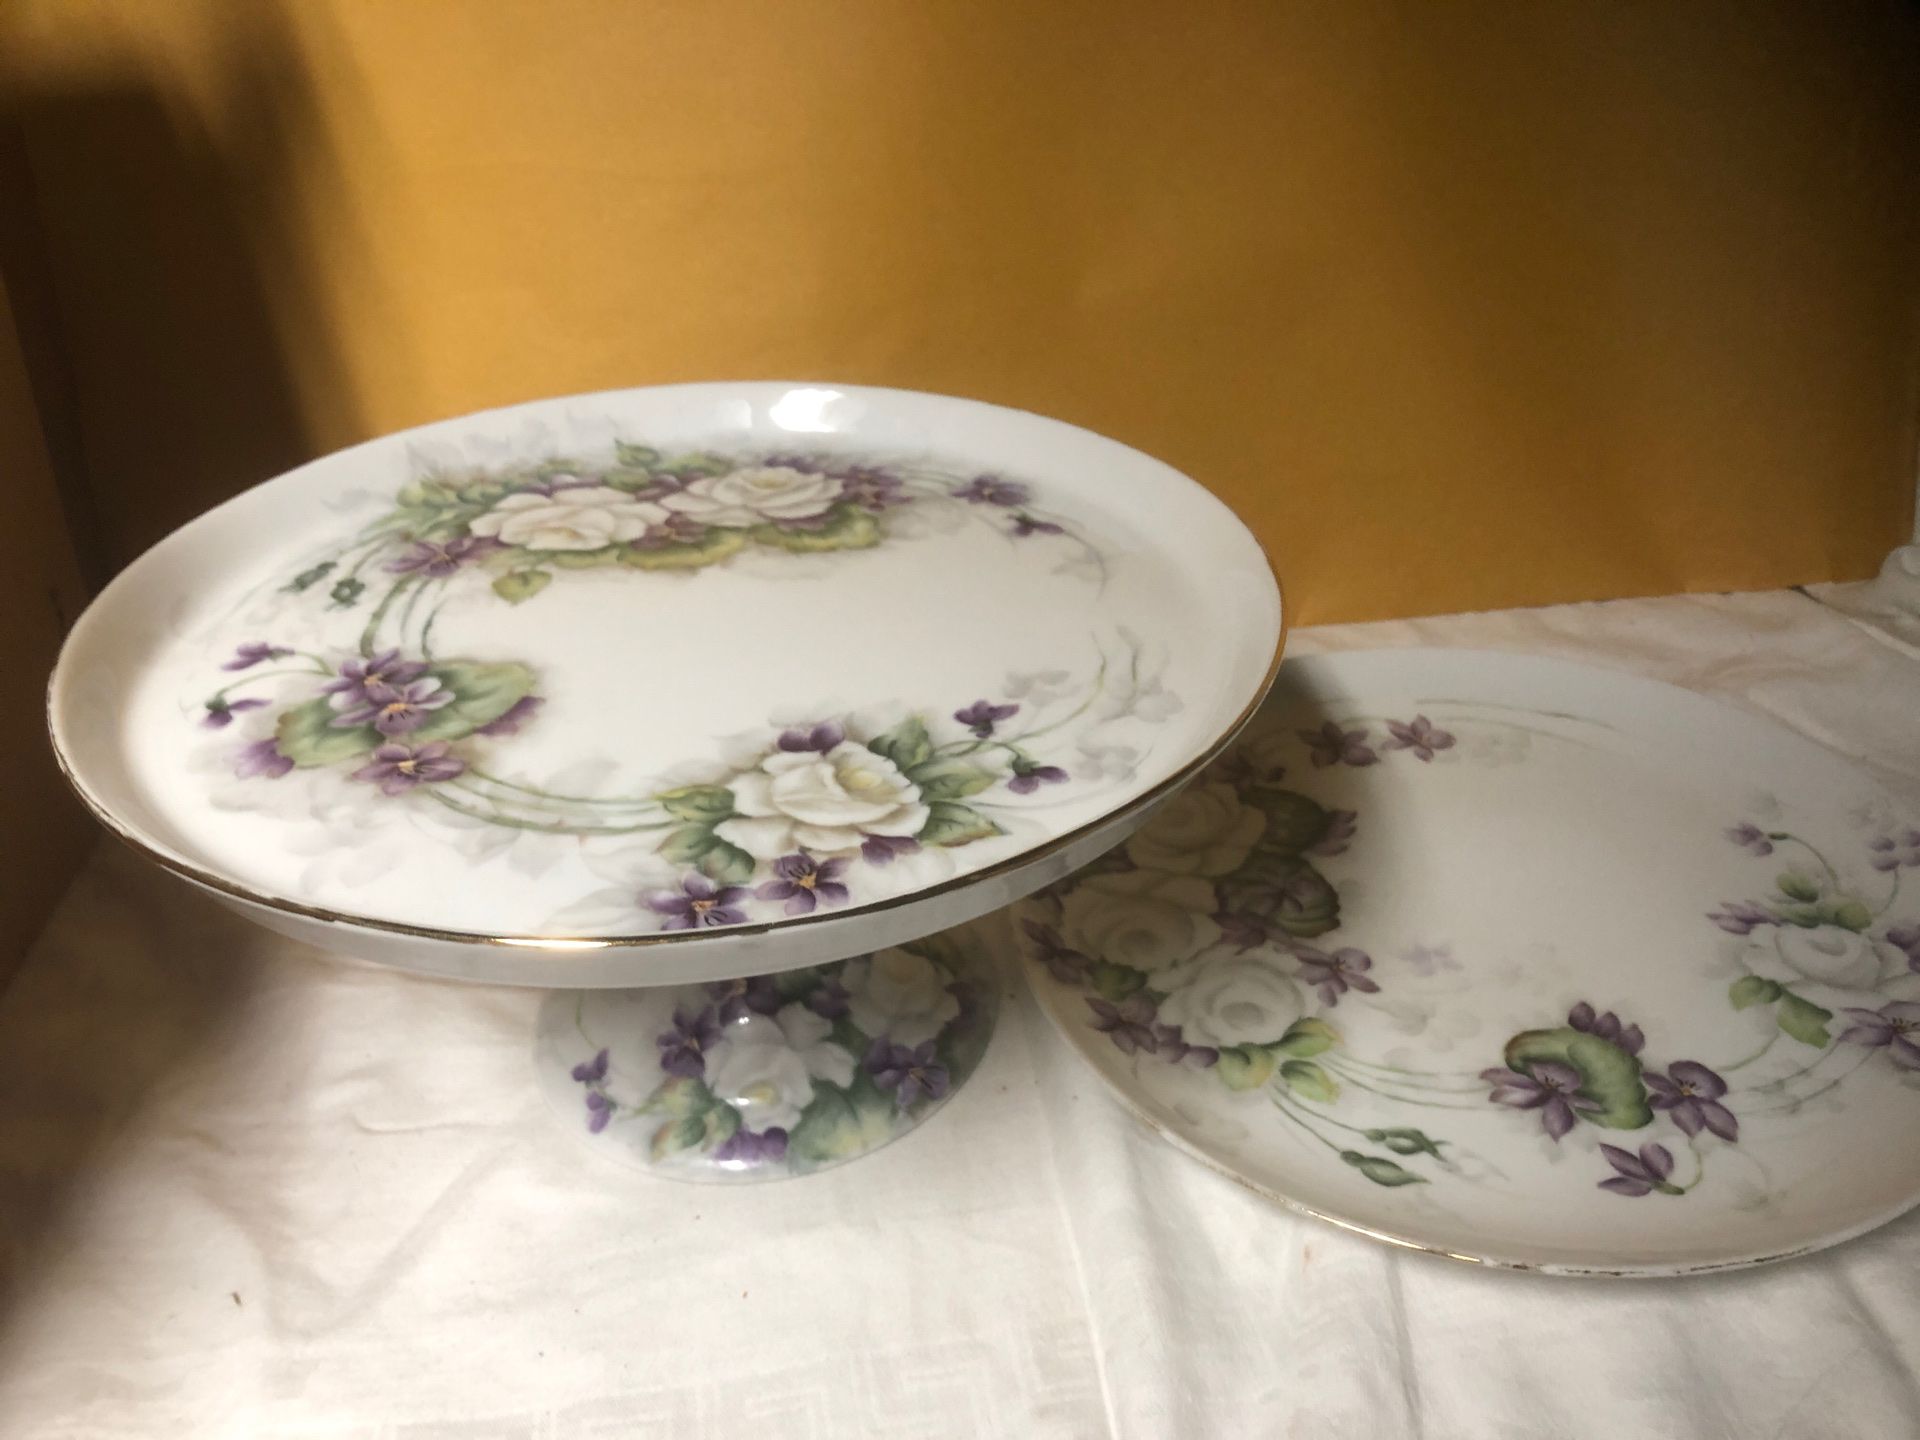 Lovely antique handpainted cake plate\server with matching plate